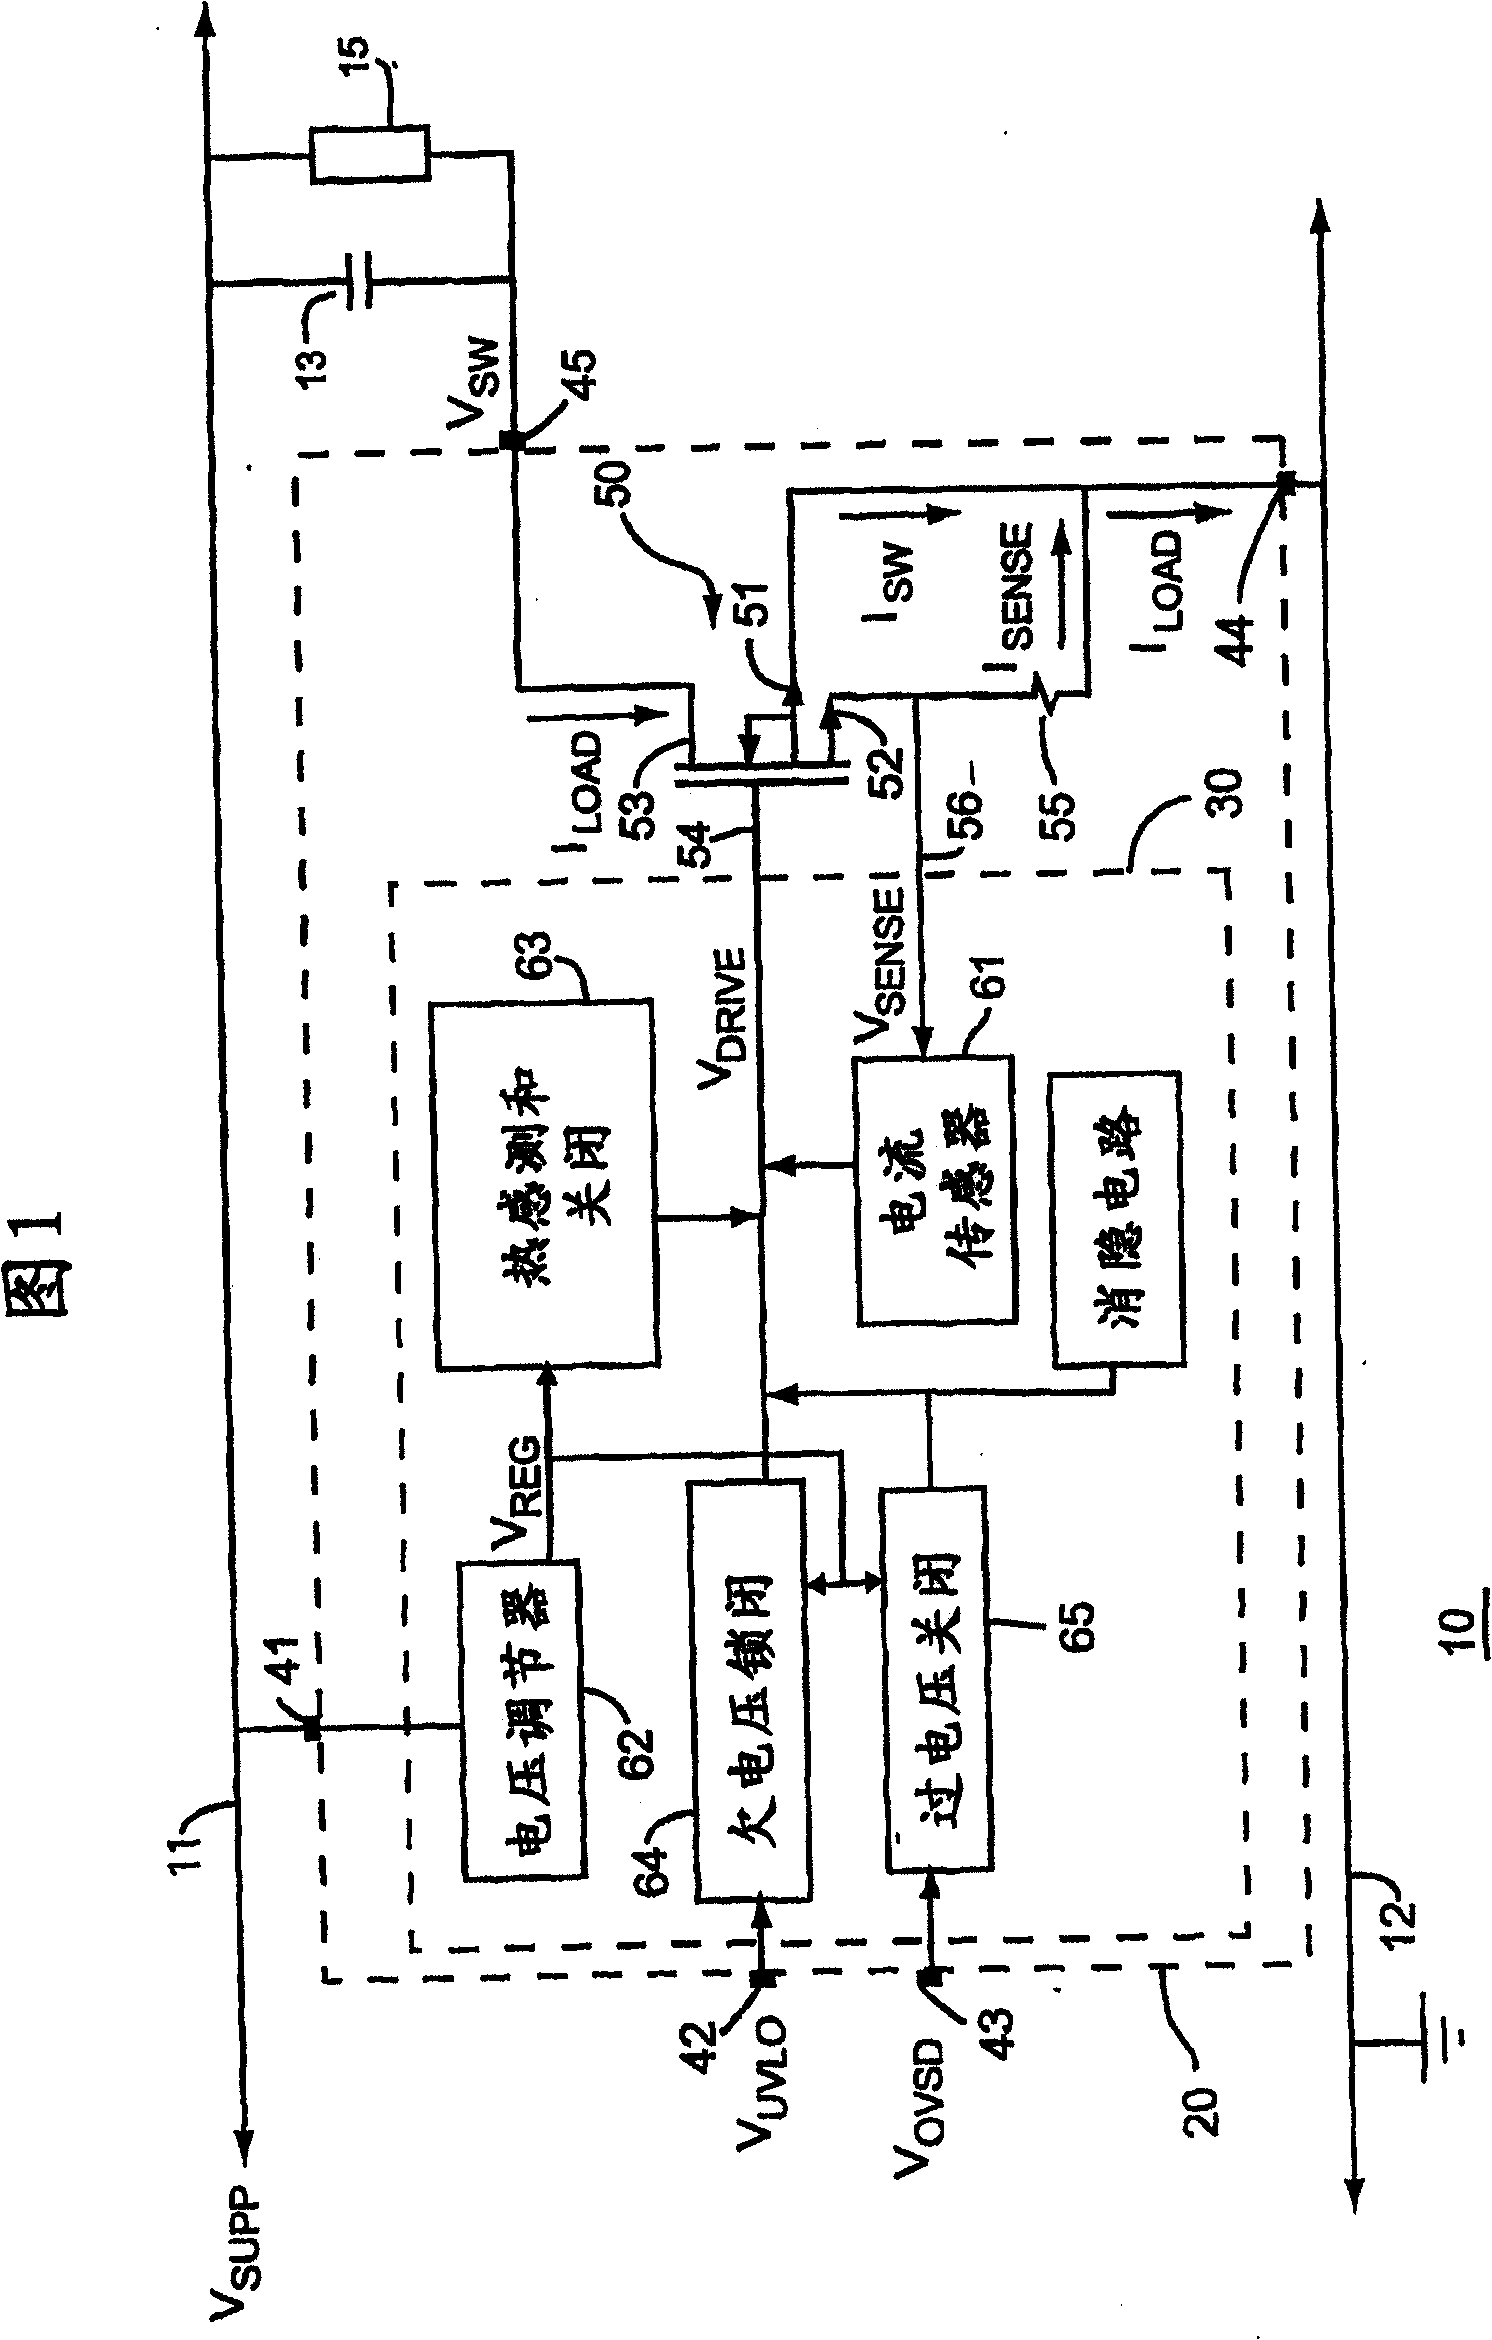 Integrated inrush current limiter circuit and method